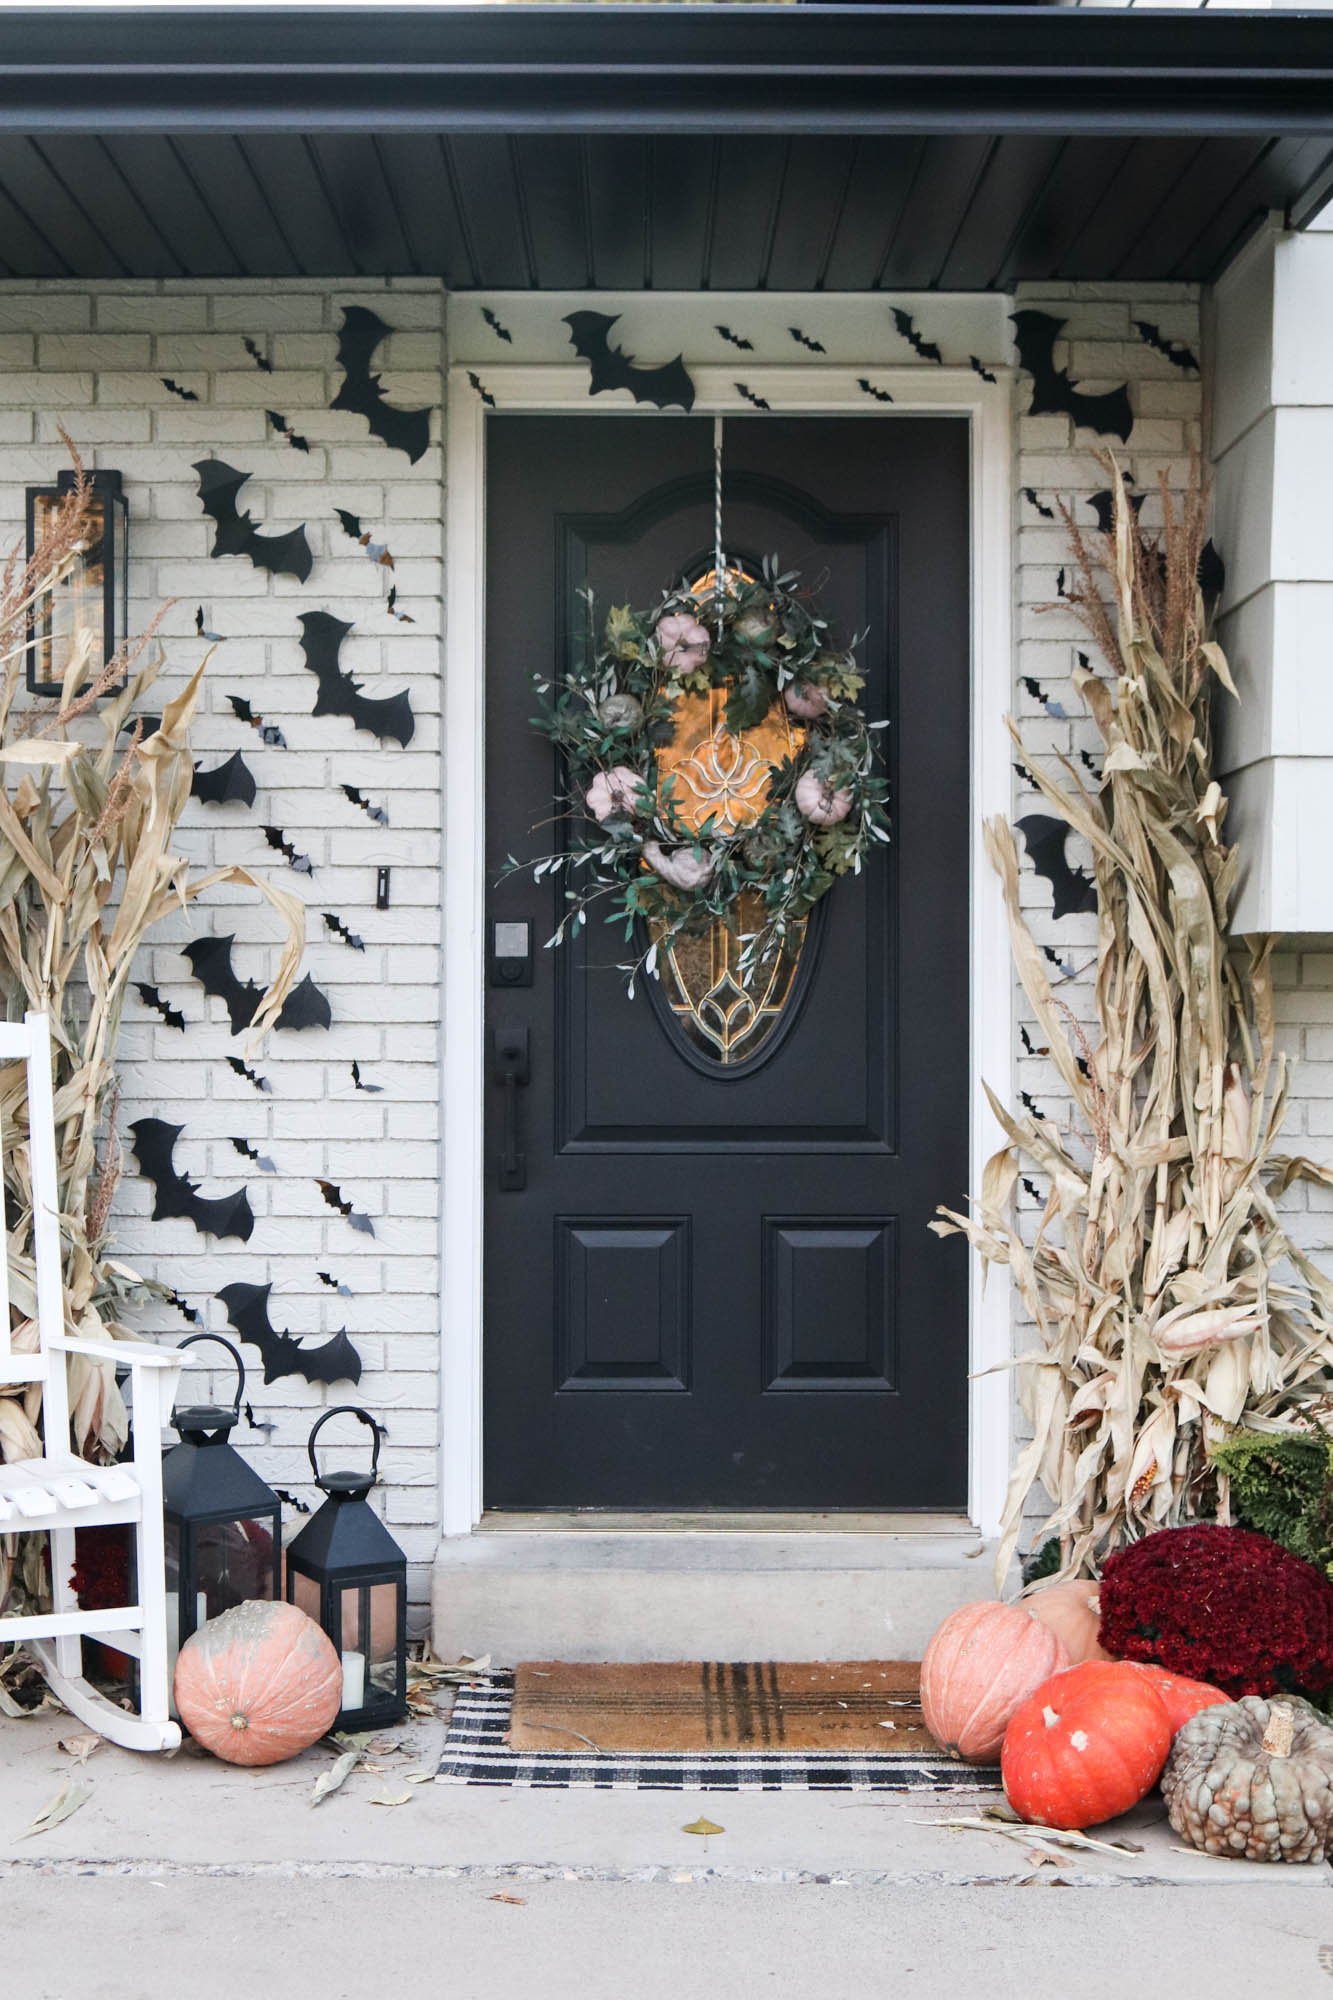 Our Halloween Front Porch - The Wood Grain Cottage